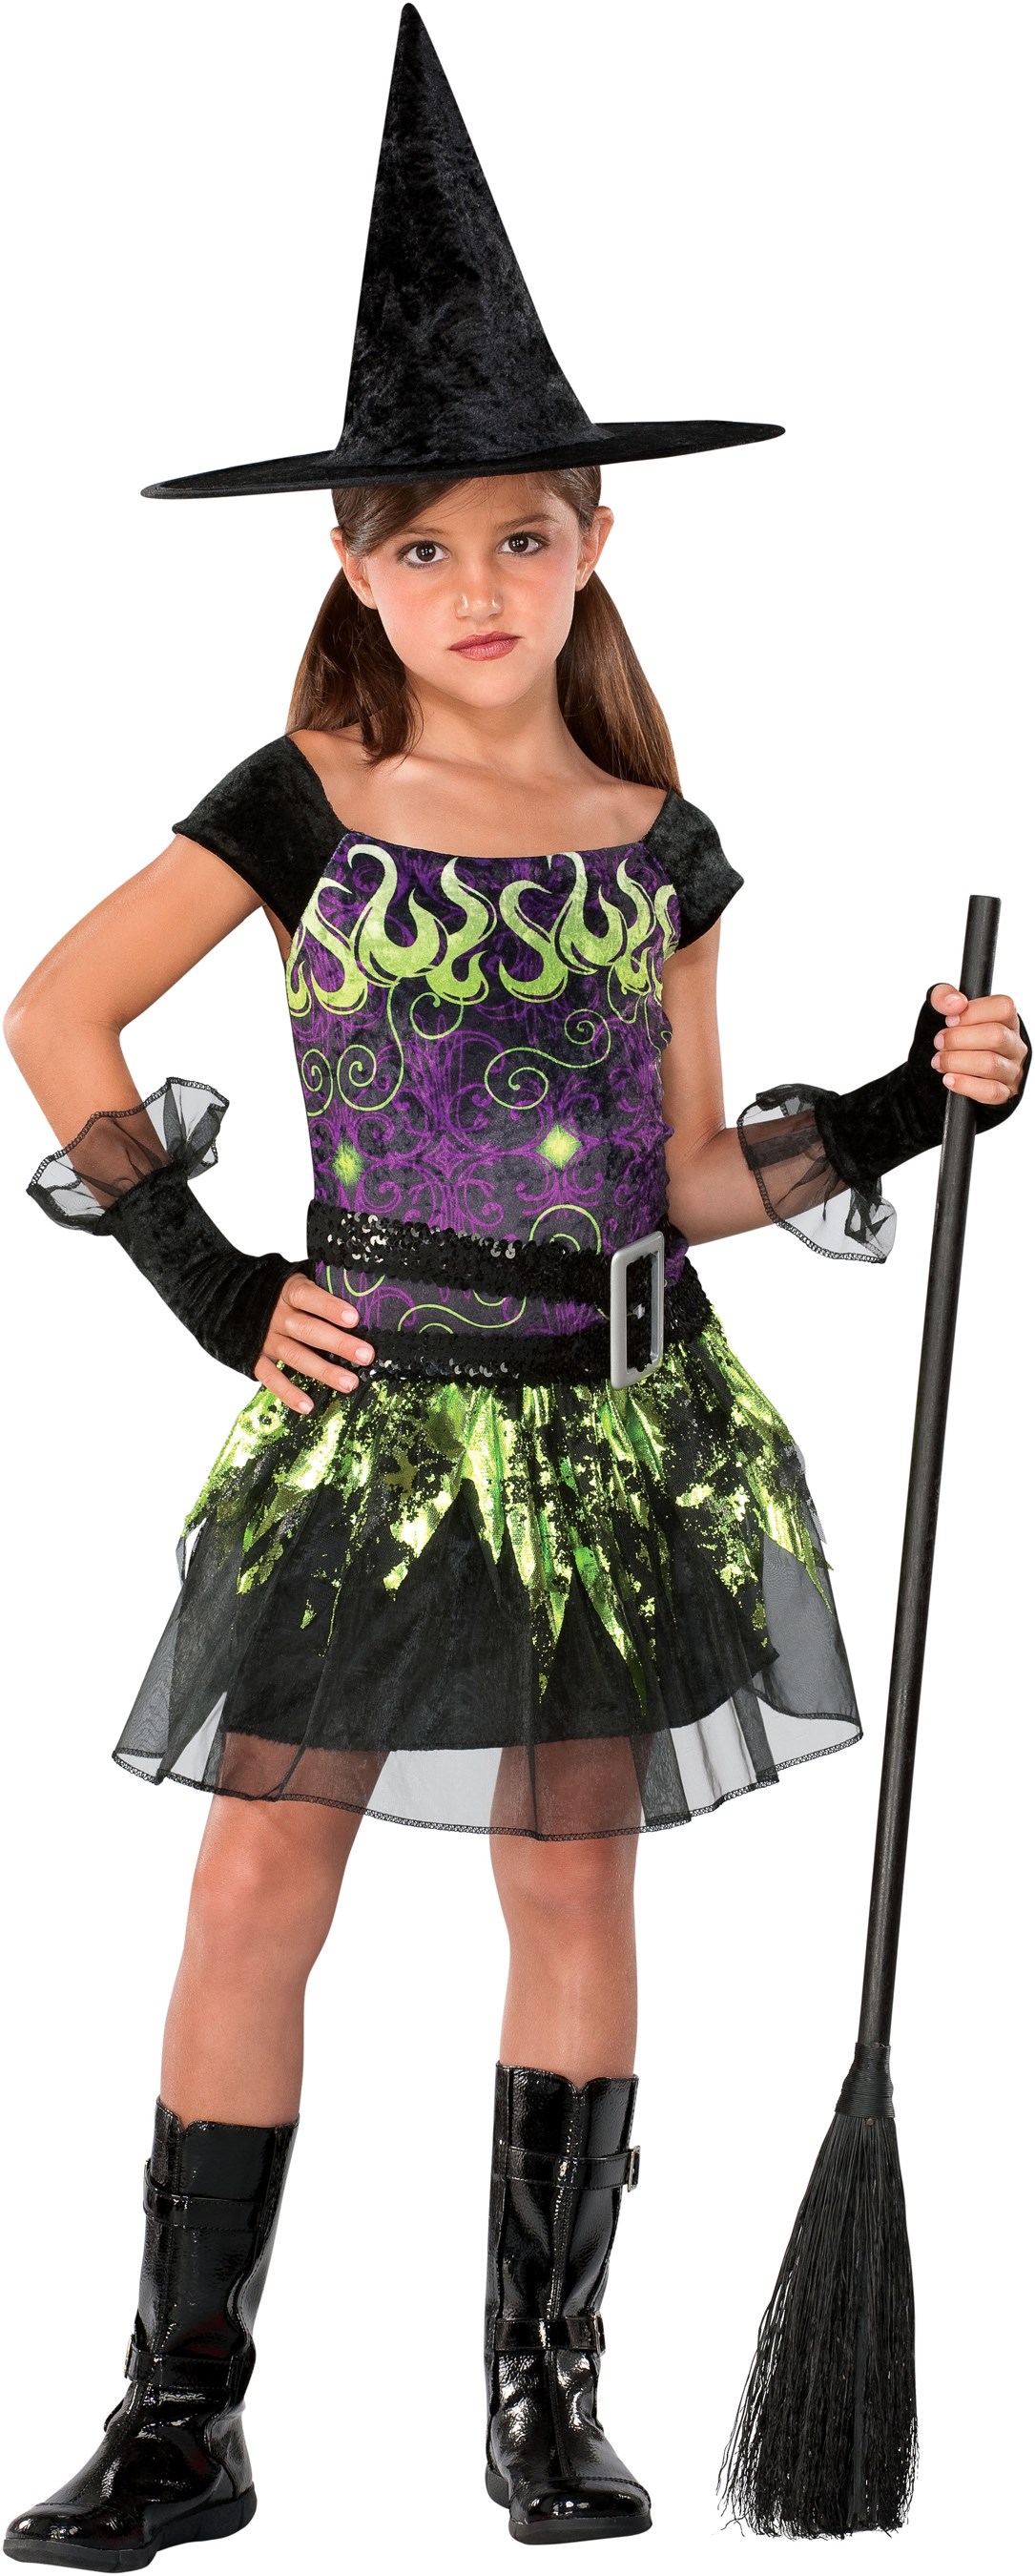 Spellcaster Witch Child Costume